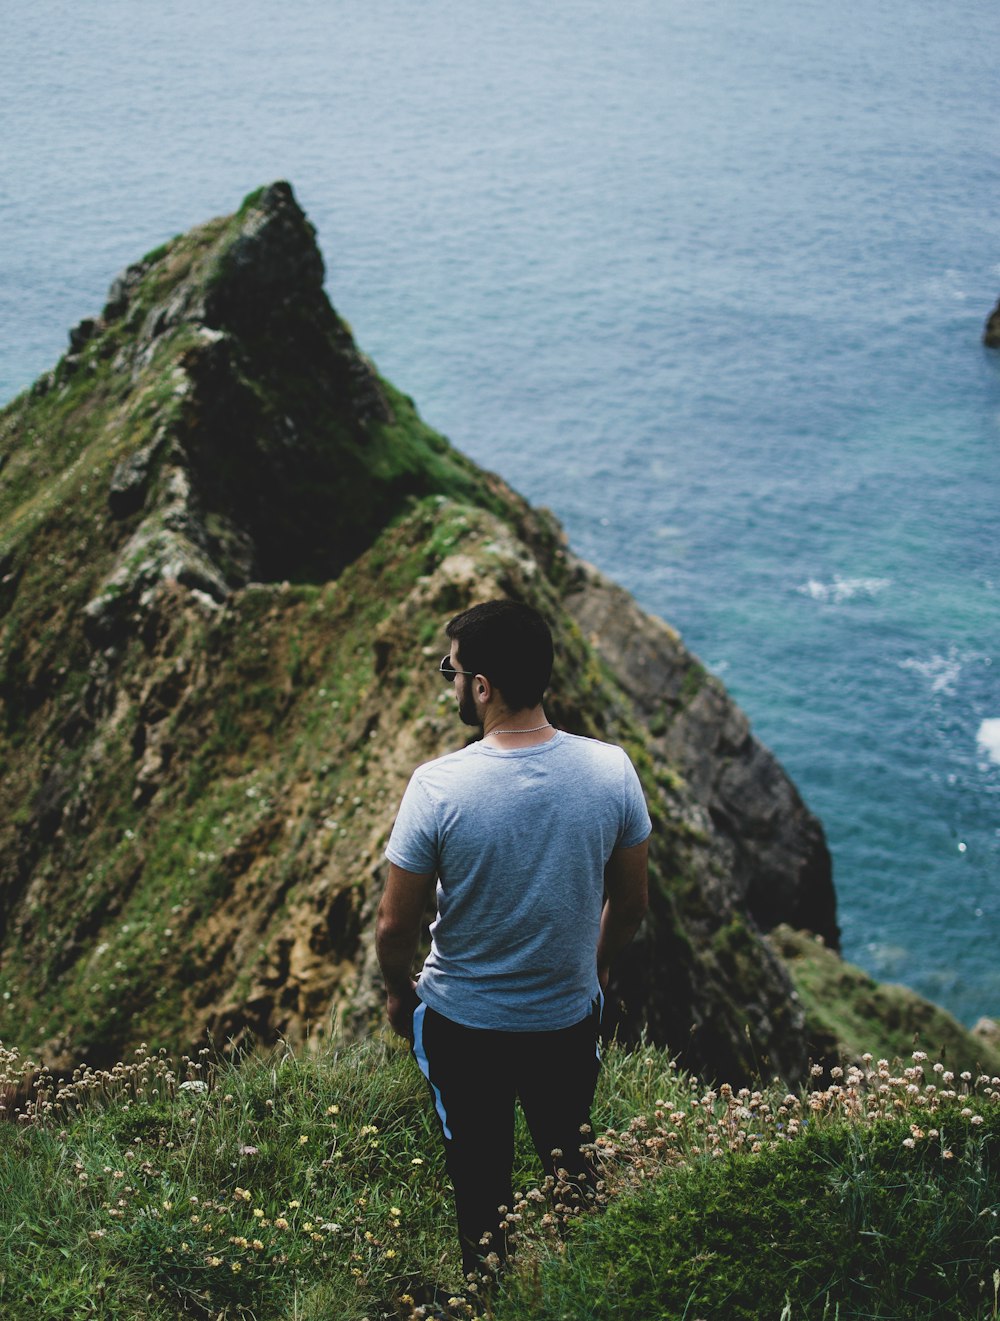 man standing near cliff while facing body of water at daytime